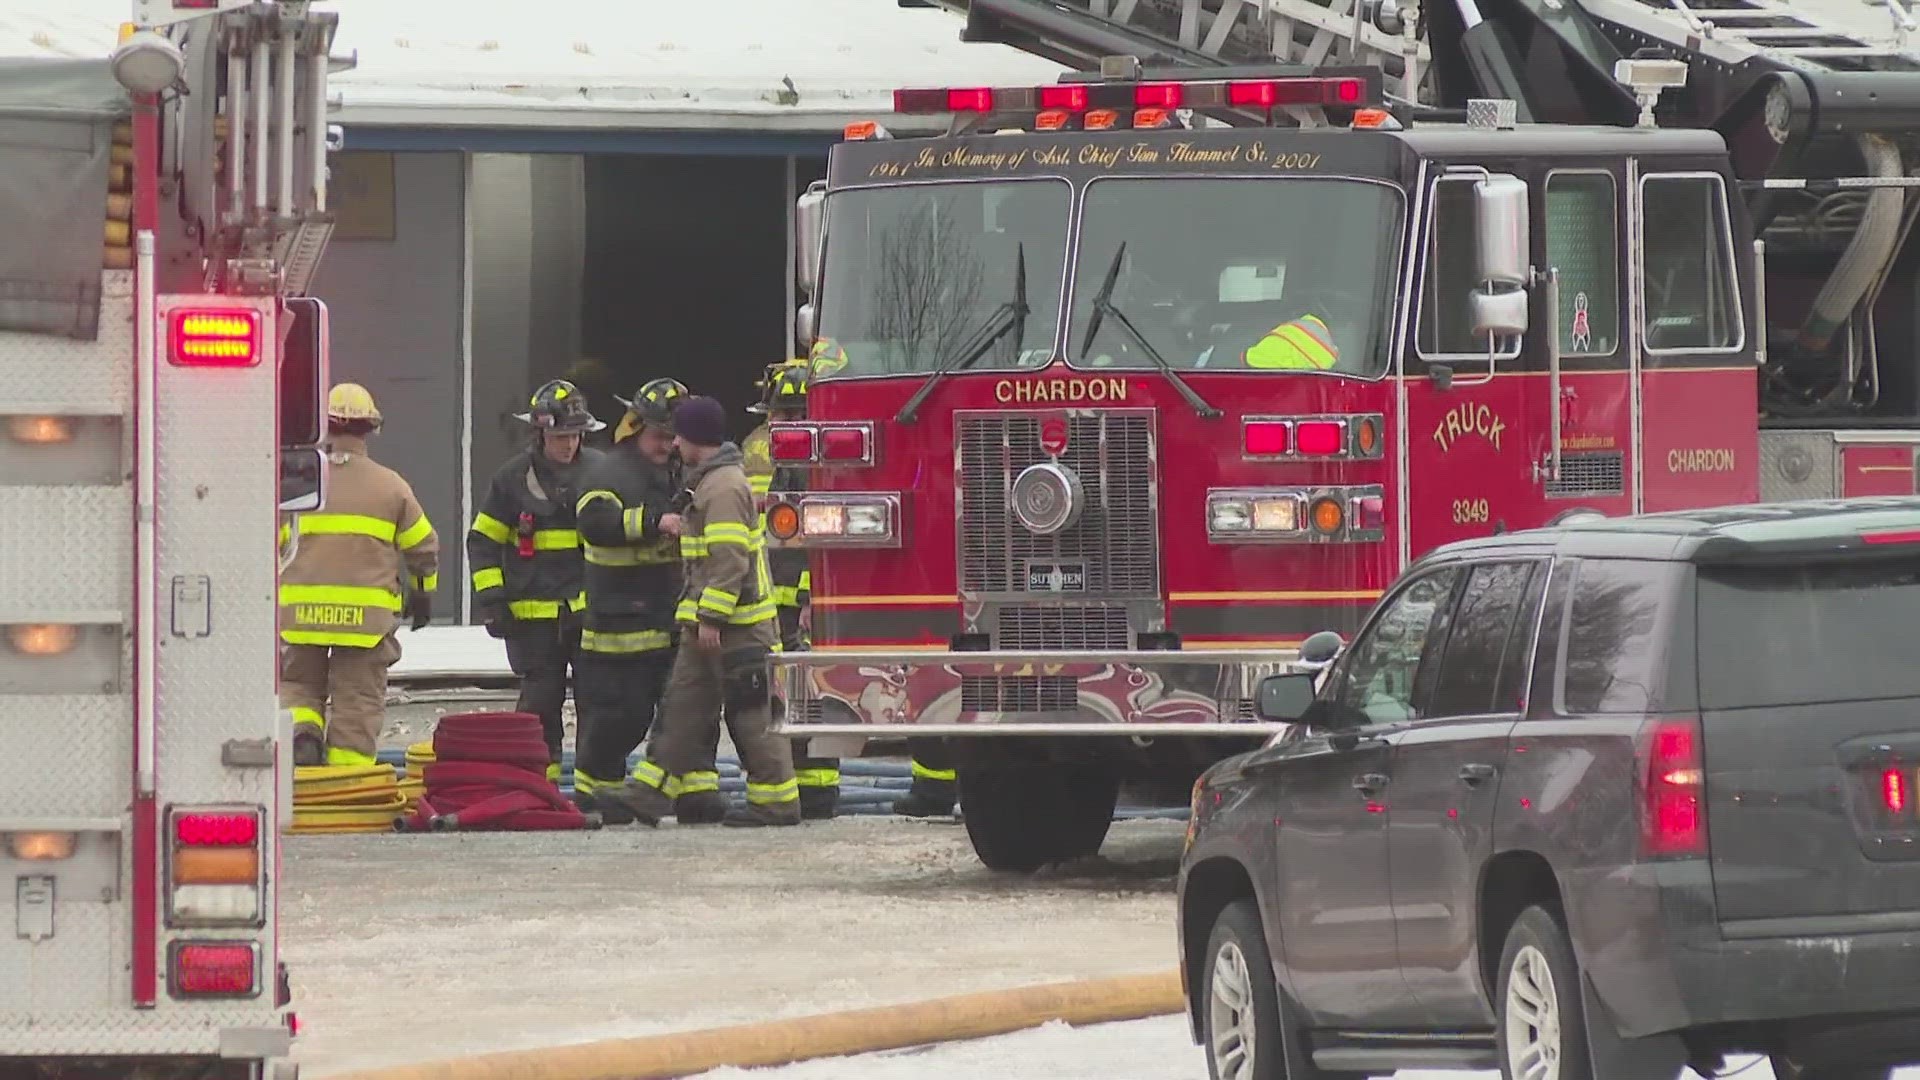 The fire happened at Interstate Towing & Transport near the border of Chardon and Hambden Township. Officials say there is no evidence that any explosions occurred.